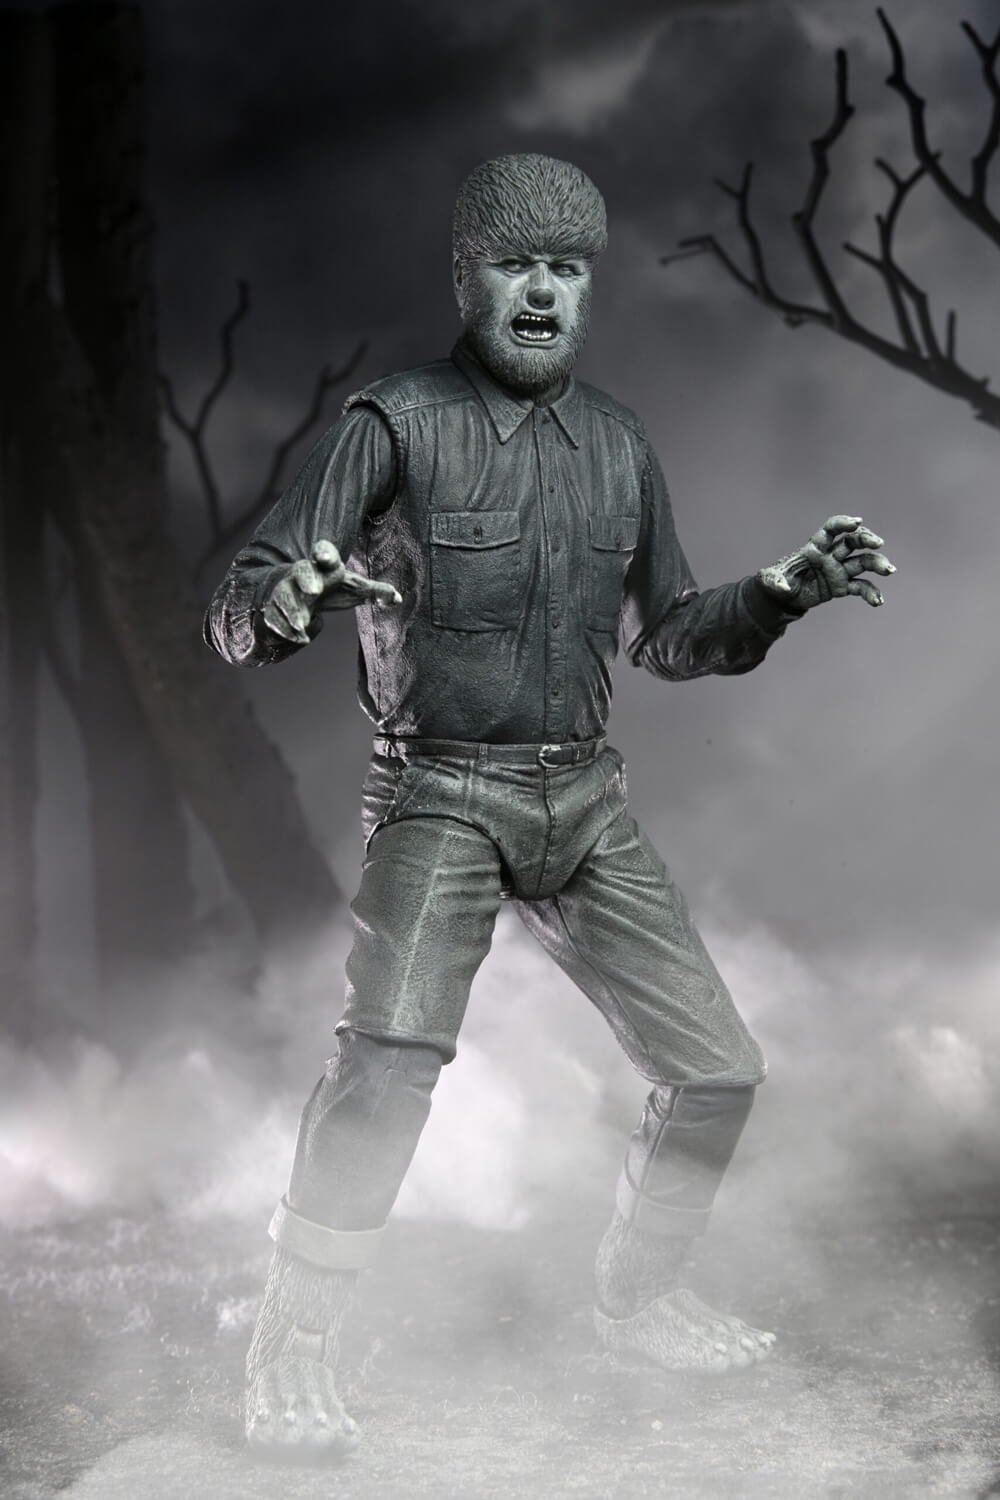 Ultimate Wolf Man (Black & White) Universal Monsters